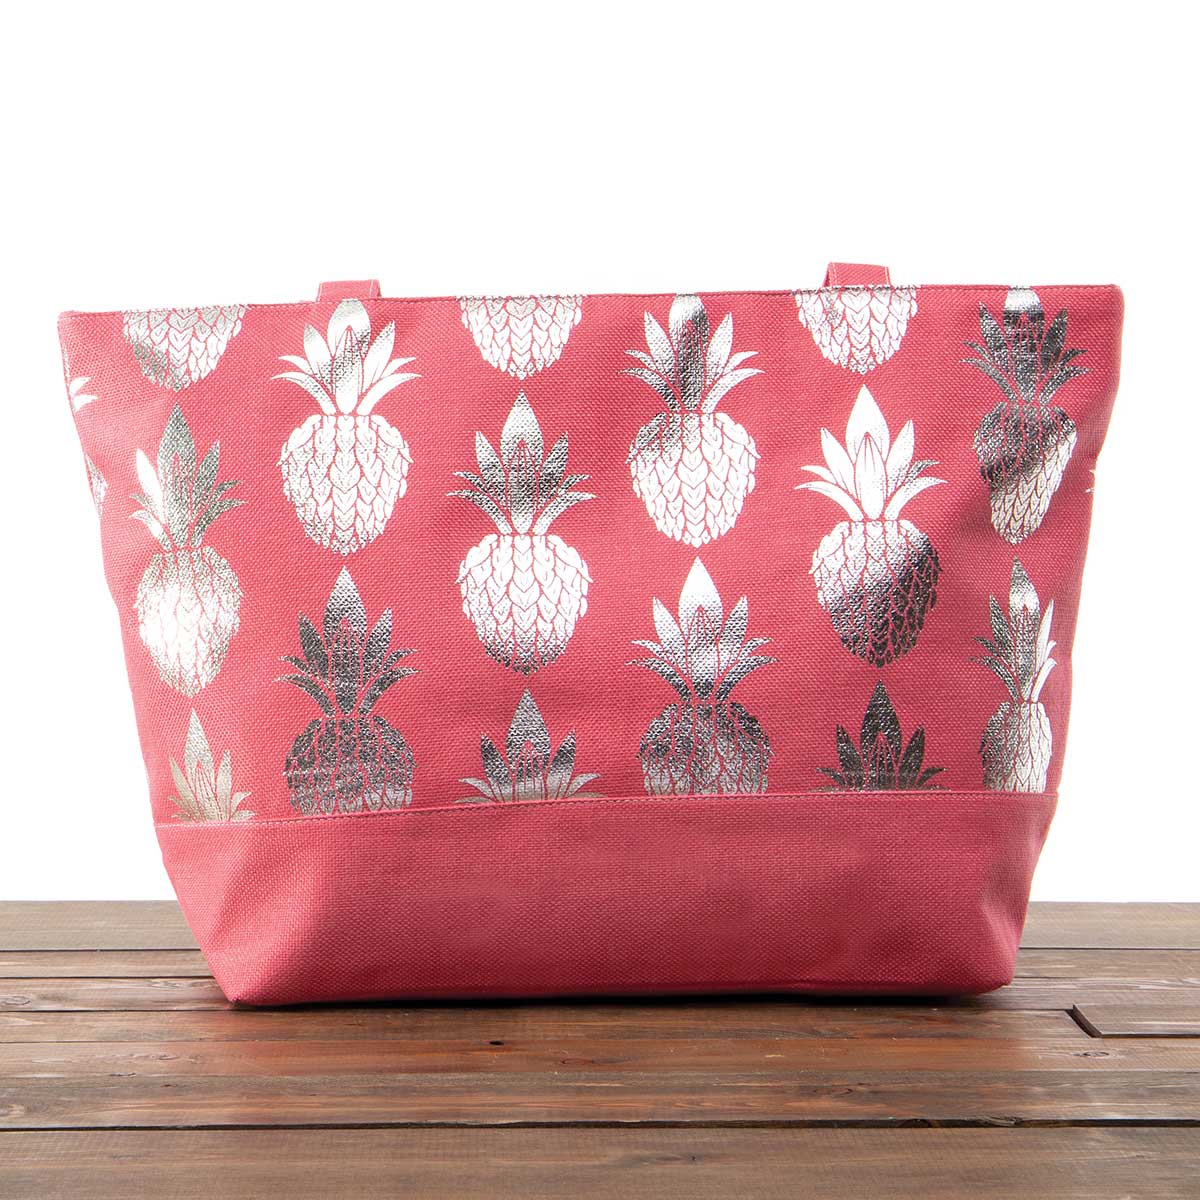 Coral Canvas Summer Bag with Silver Pineapples 21"x13"x6" 50sp